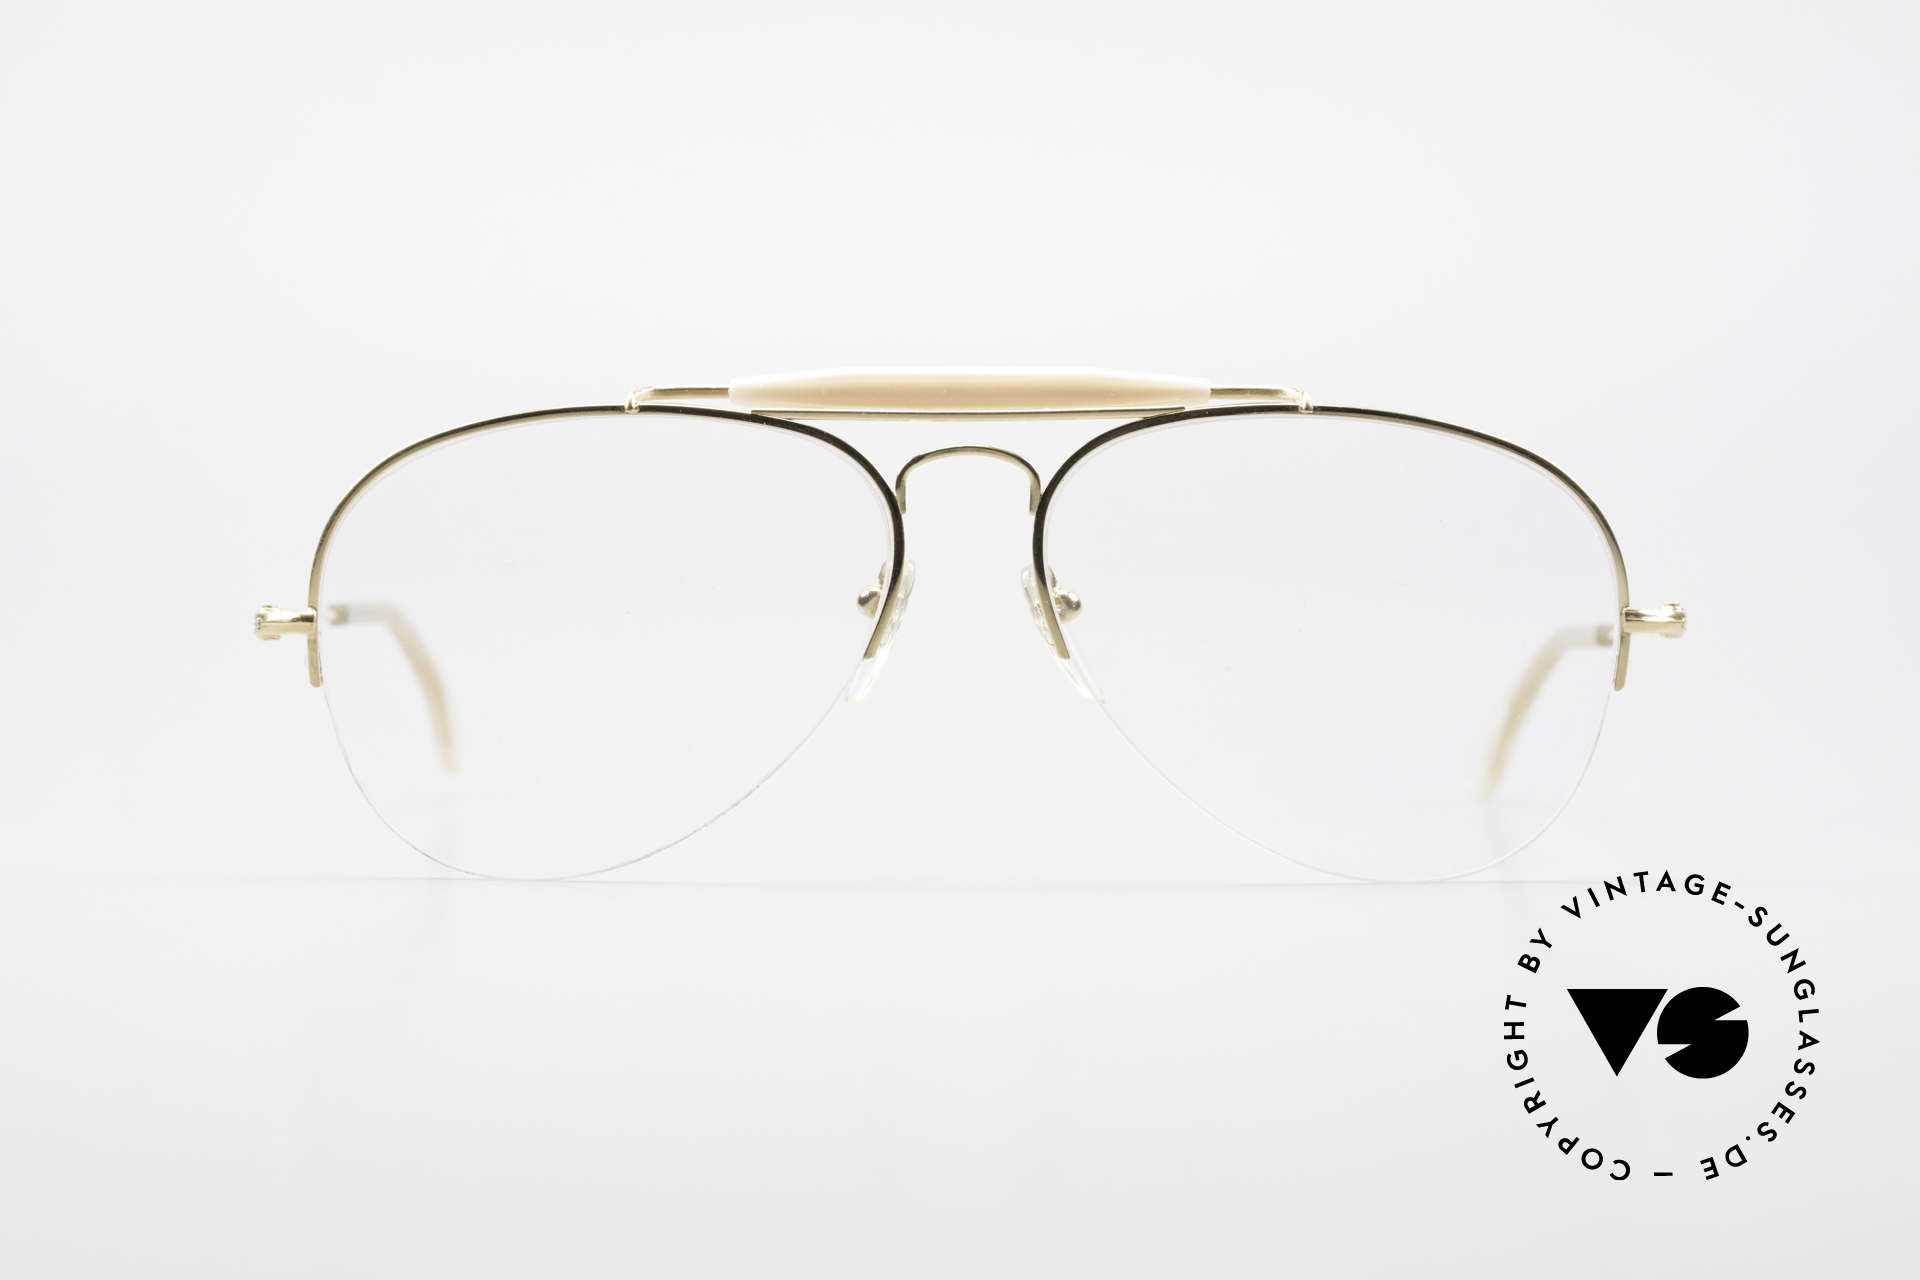 ray ban vintage frames \u003e Up to 63% OFF 